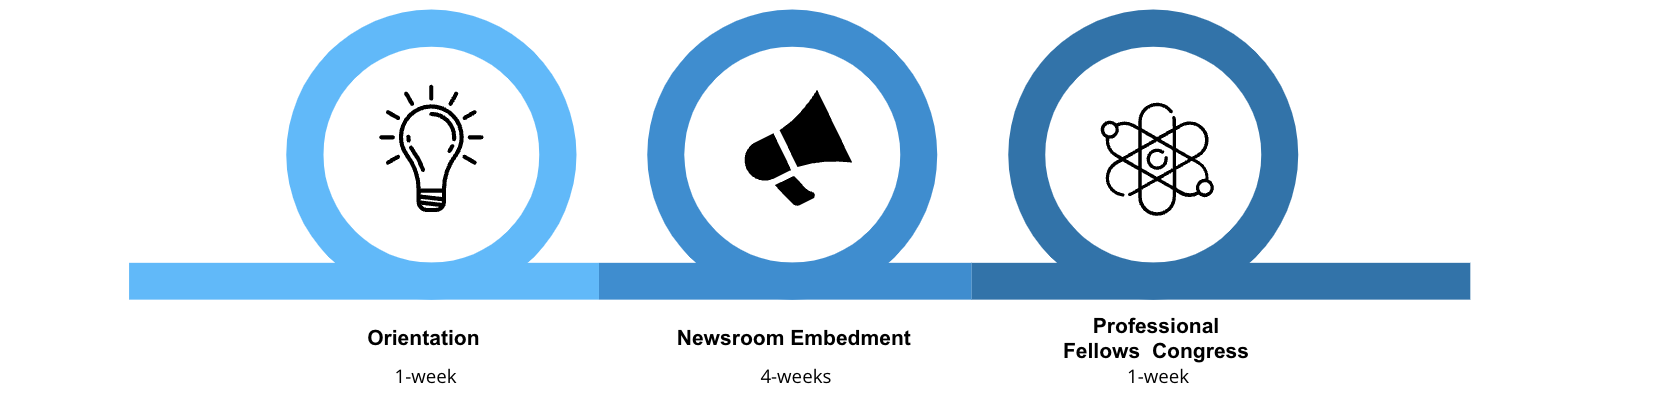 image reading: "orientation, 1-week. newsroom embedment, 4-weeks. professional fellow congress, 1-week." with graphics of a light bulb, bullhorn, and an atom 